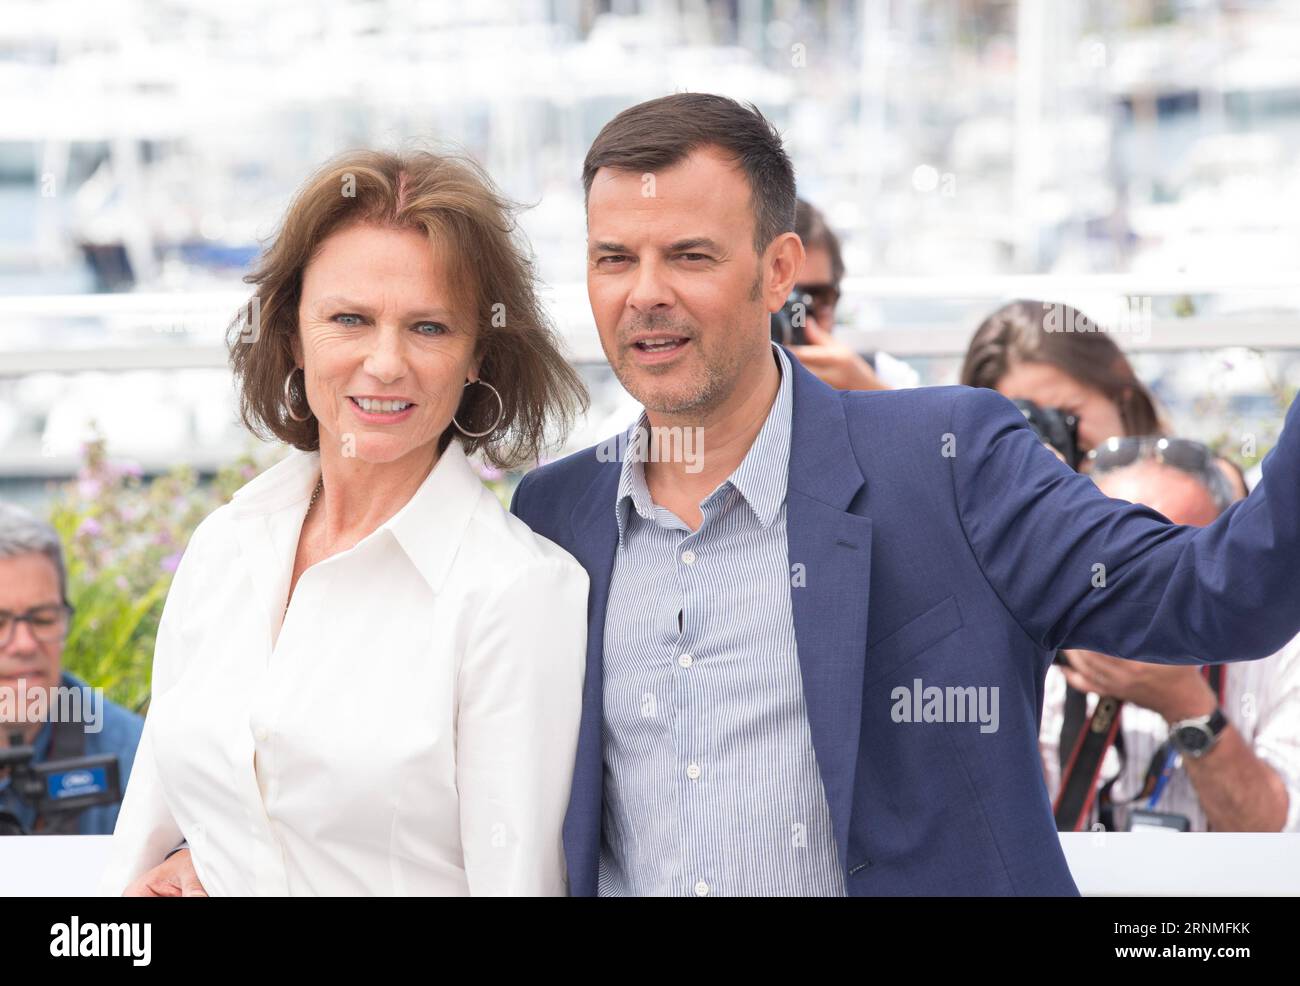 (170526) -- CANNES, May 26, 2017 -- British actress Jacqueline Bisset (L) and director Francois Ozon pose for the photocall of the film Amant Double (The Double Lover) during the 70th annual Cannes Film Festival at Palais des Festivals in Cannes, France, on May 26, 2017. )(yk) FRANCE-CANNES-70TH CANNES FILM FESTIVAL-IN COMPETITION-AMANT DOUBLE-PHOTOCALL XuxJinquan PUBLICATIONxNOTxINxCHN   Cannes May 26 2017 British actress Jacqueline Bisset l and Director François Ozone Pose for The photo call of The Film Amant Double The Double Lover during The 70th Annual Cannes Film Festival AT Palais the F Stock Photo